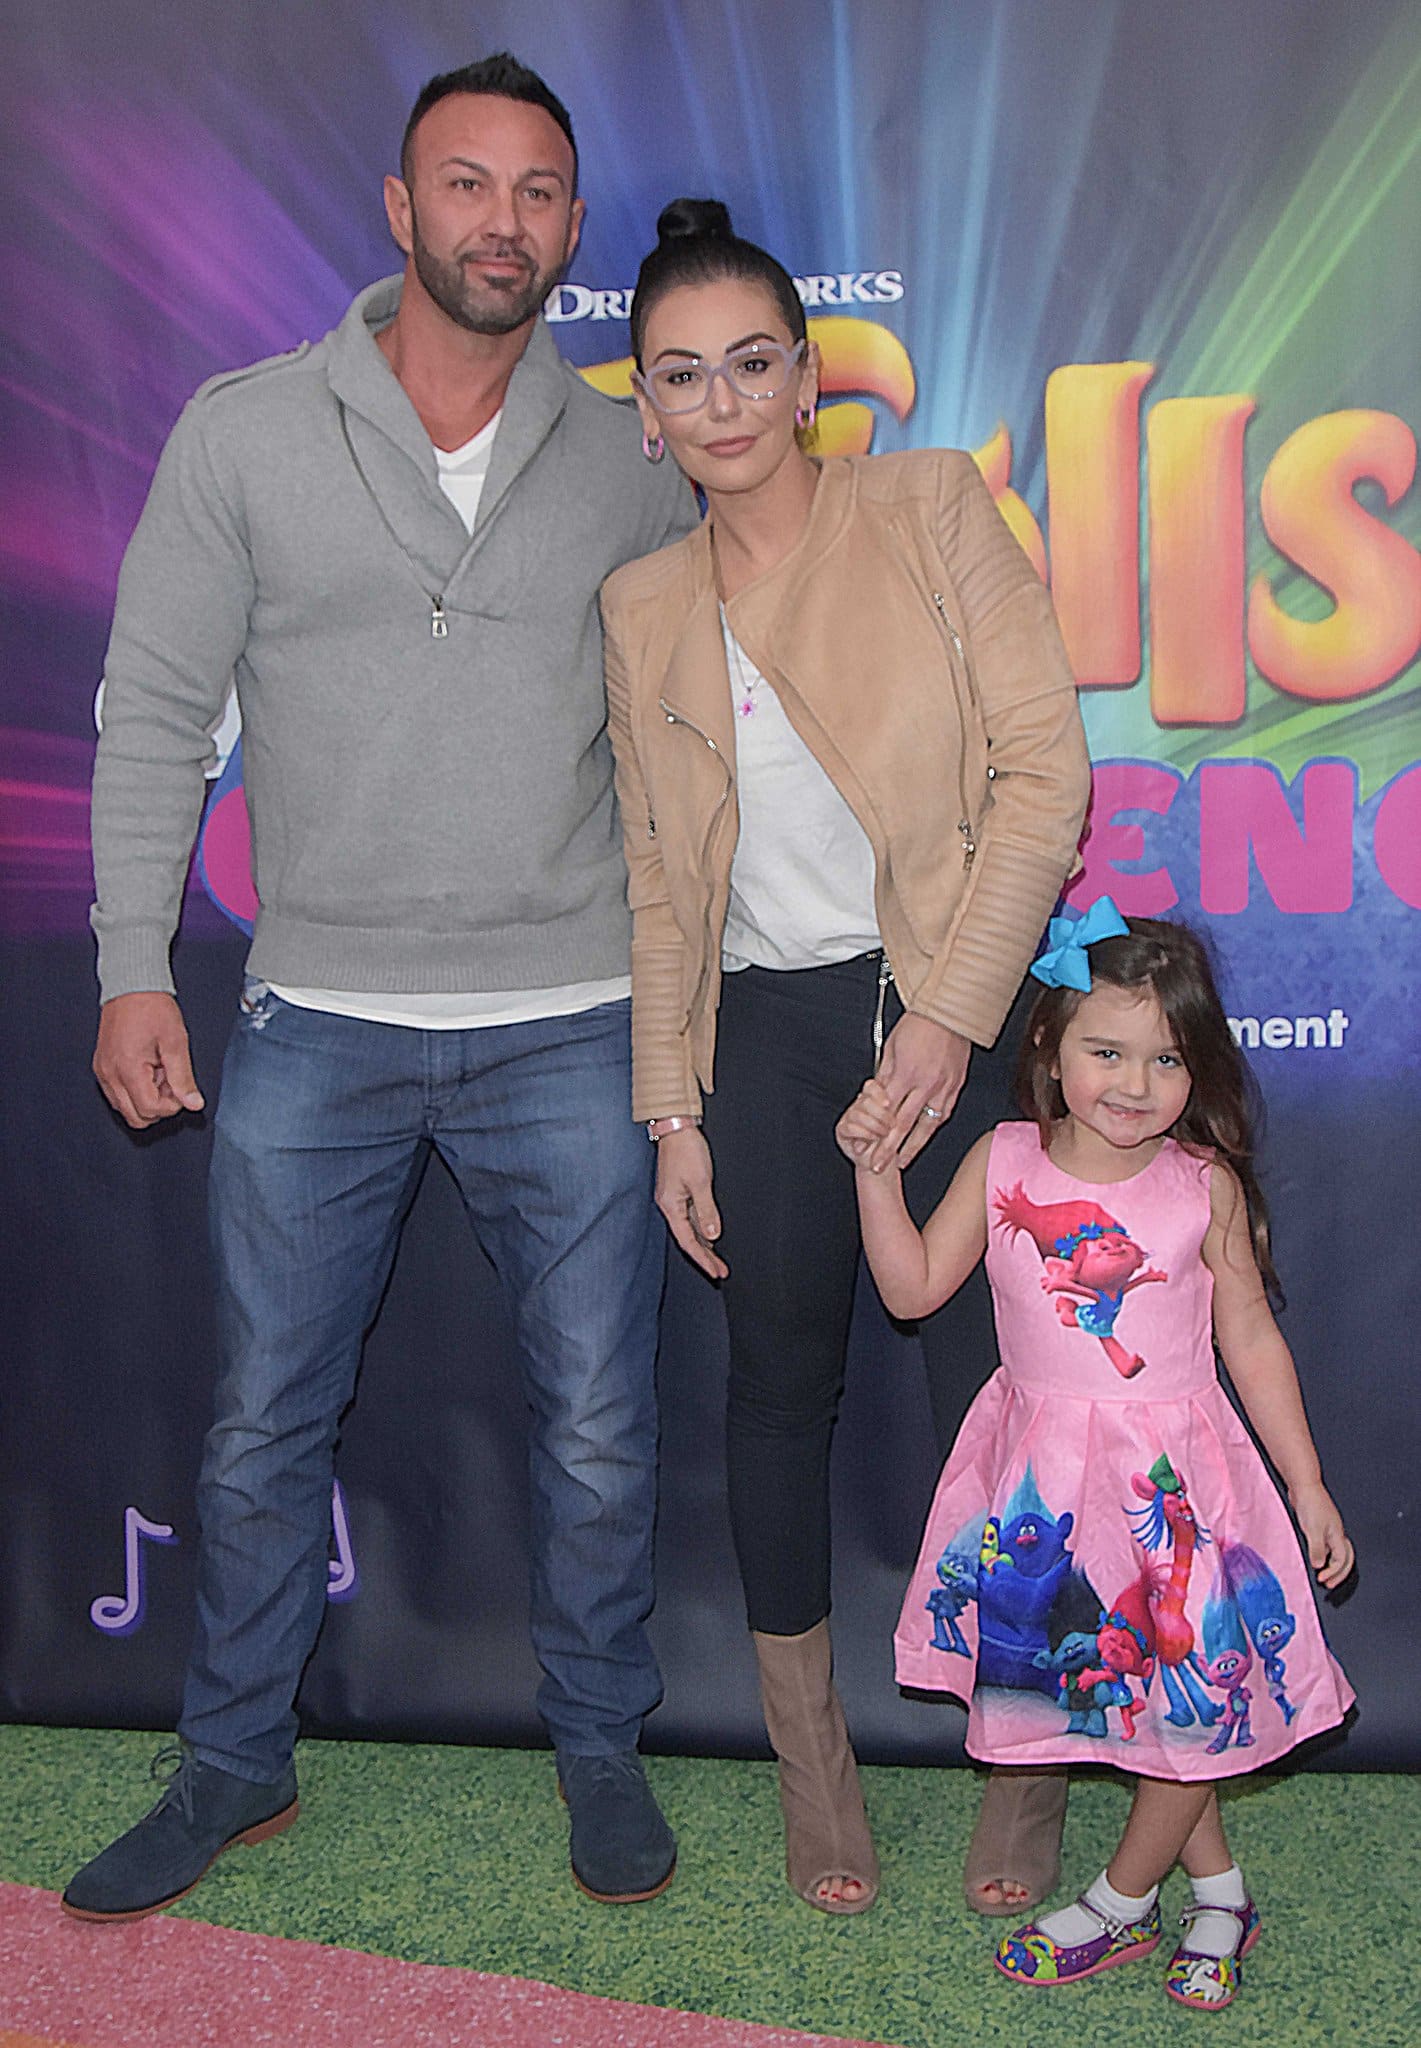 JWoww filed for divorce in September 2018 but the two remained cordial for their children